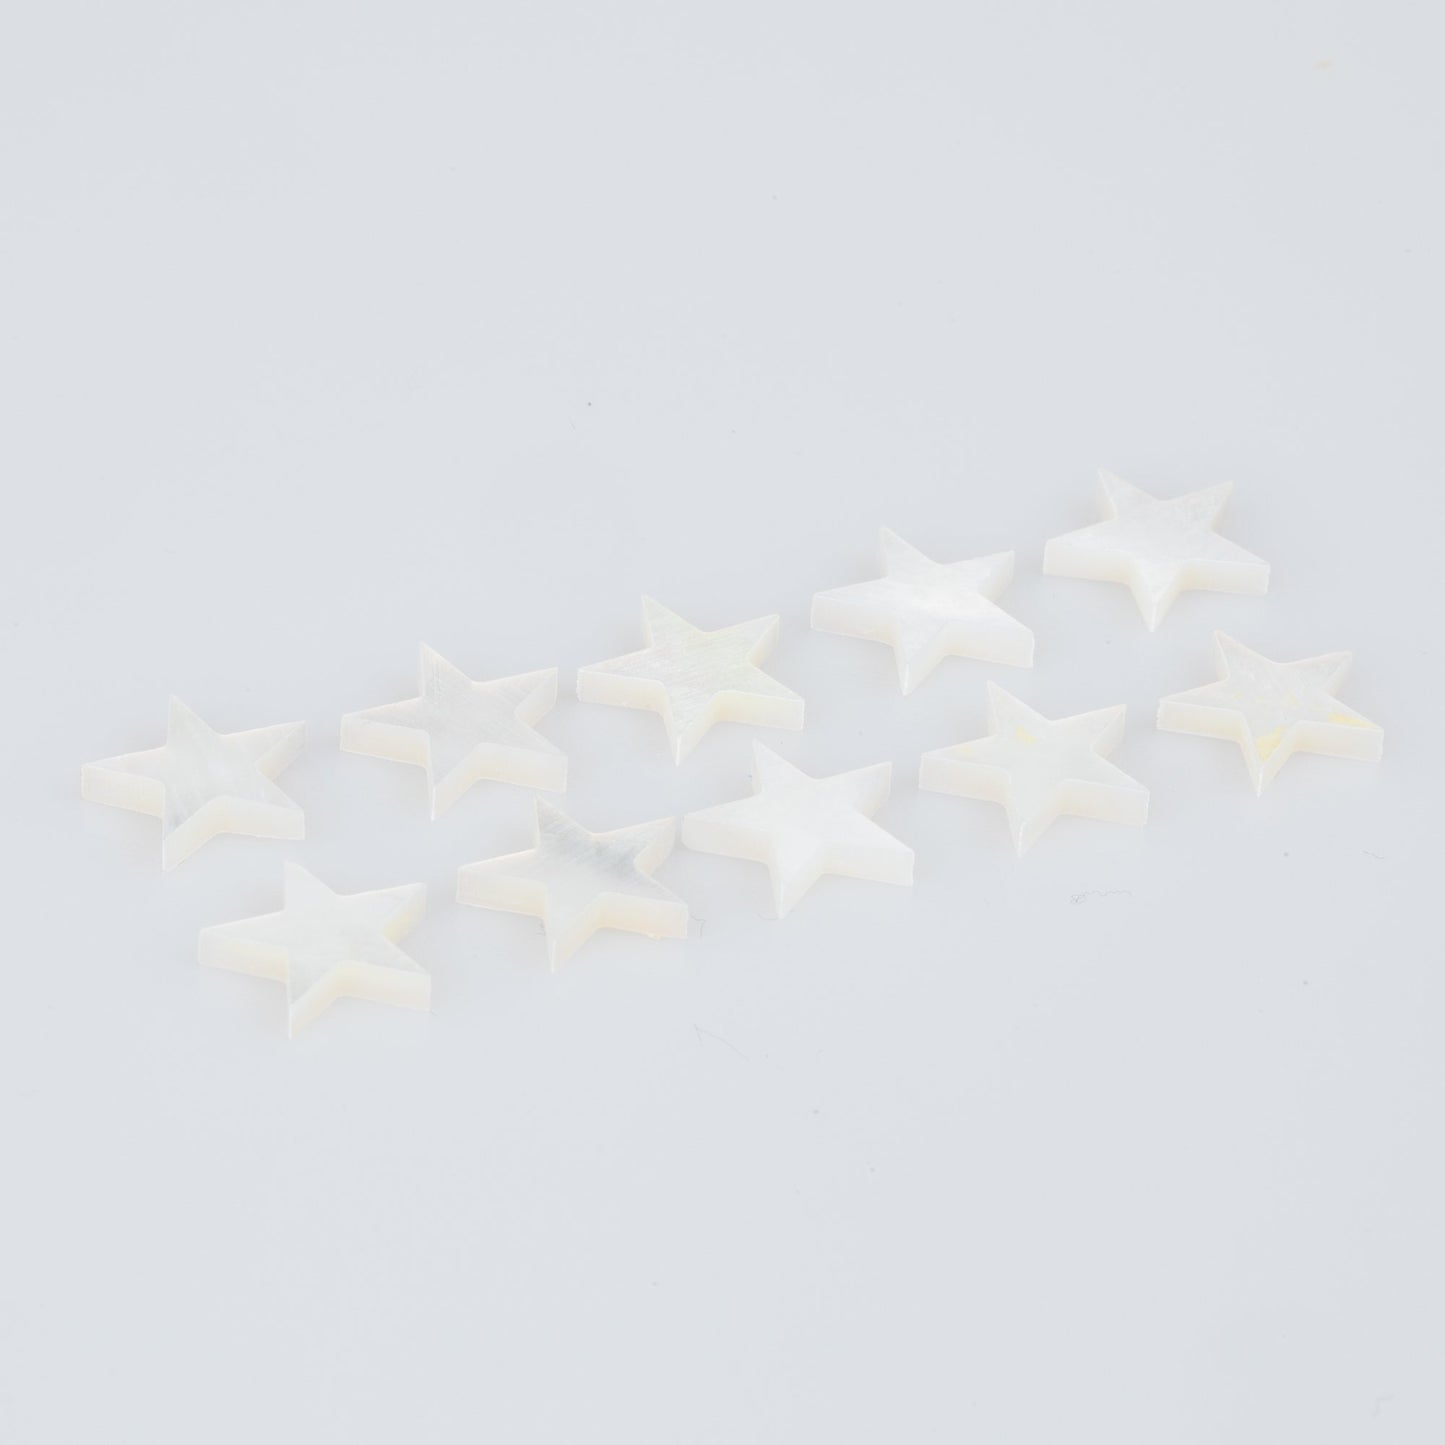 Mother of Pearl -Star Inlays (Set of 10)